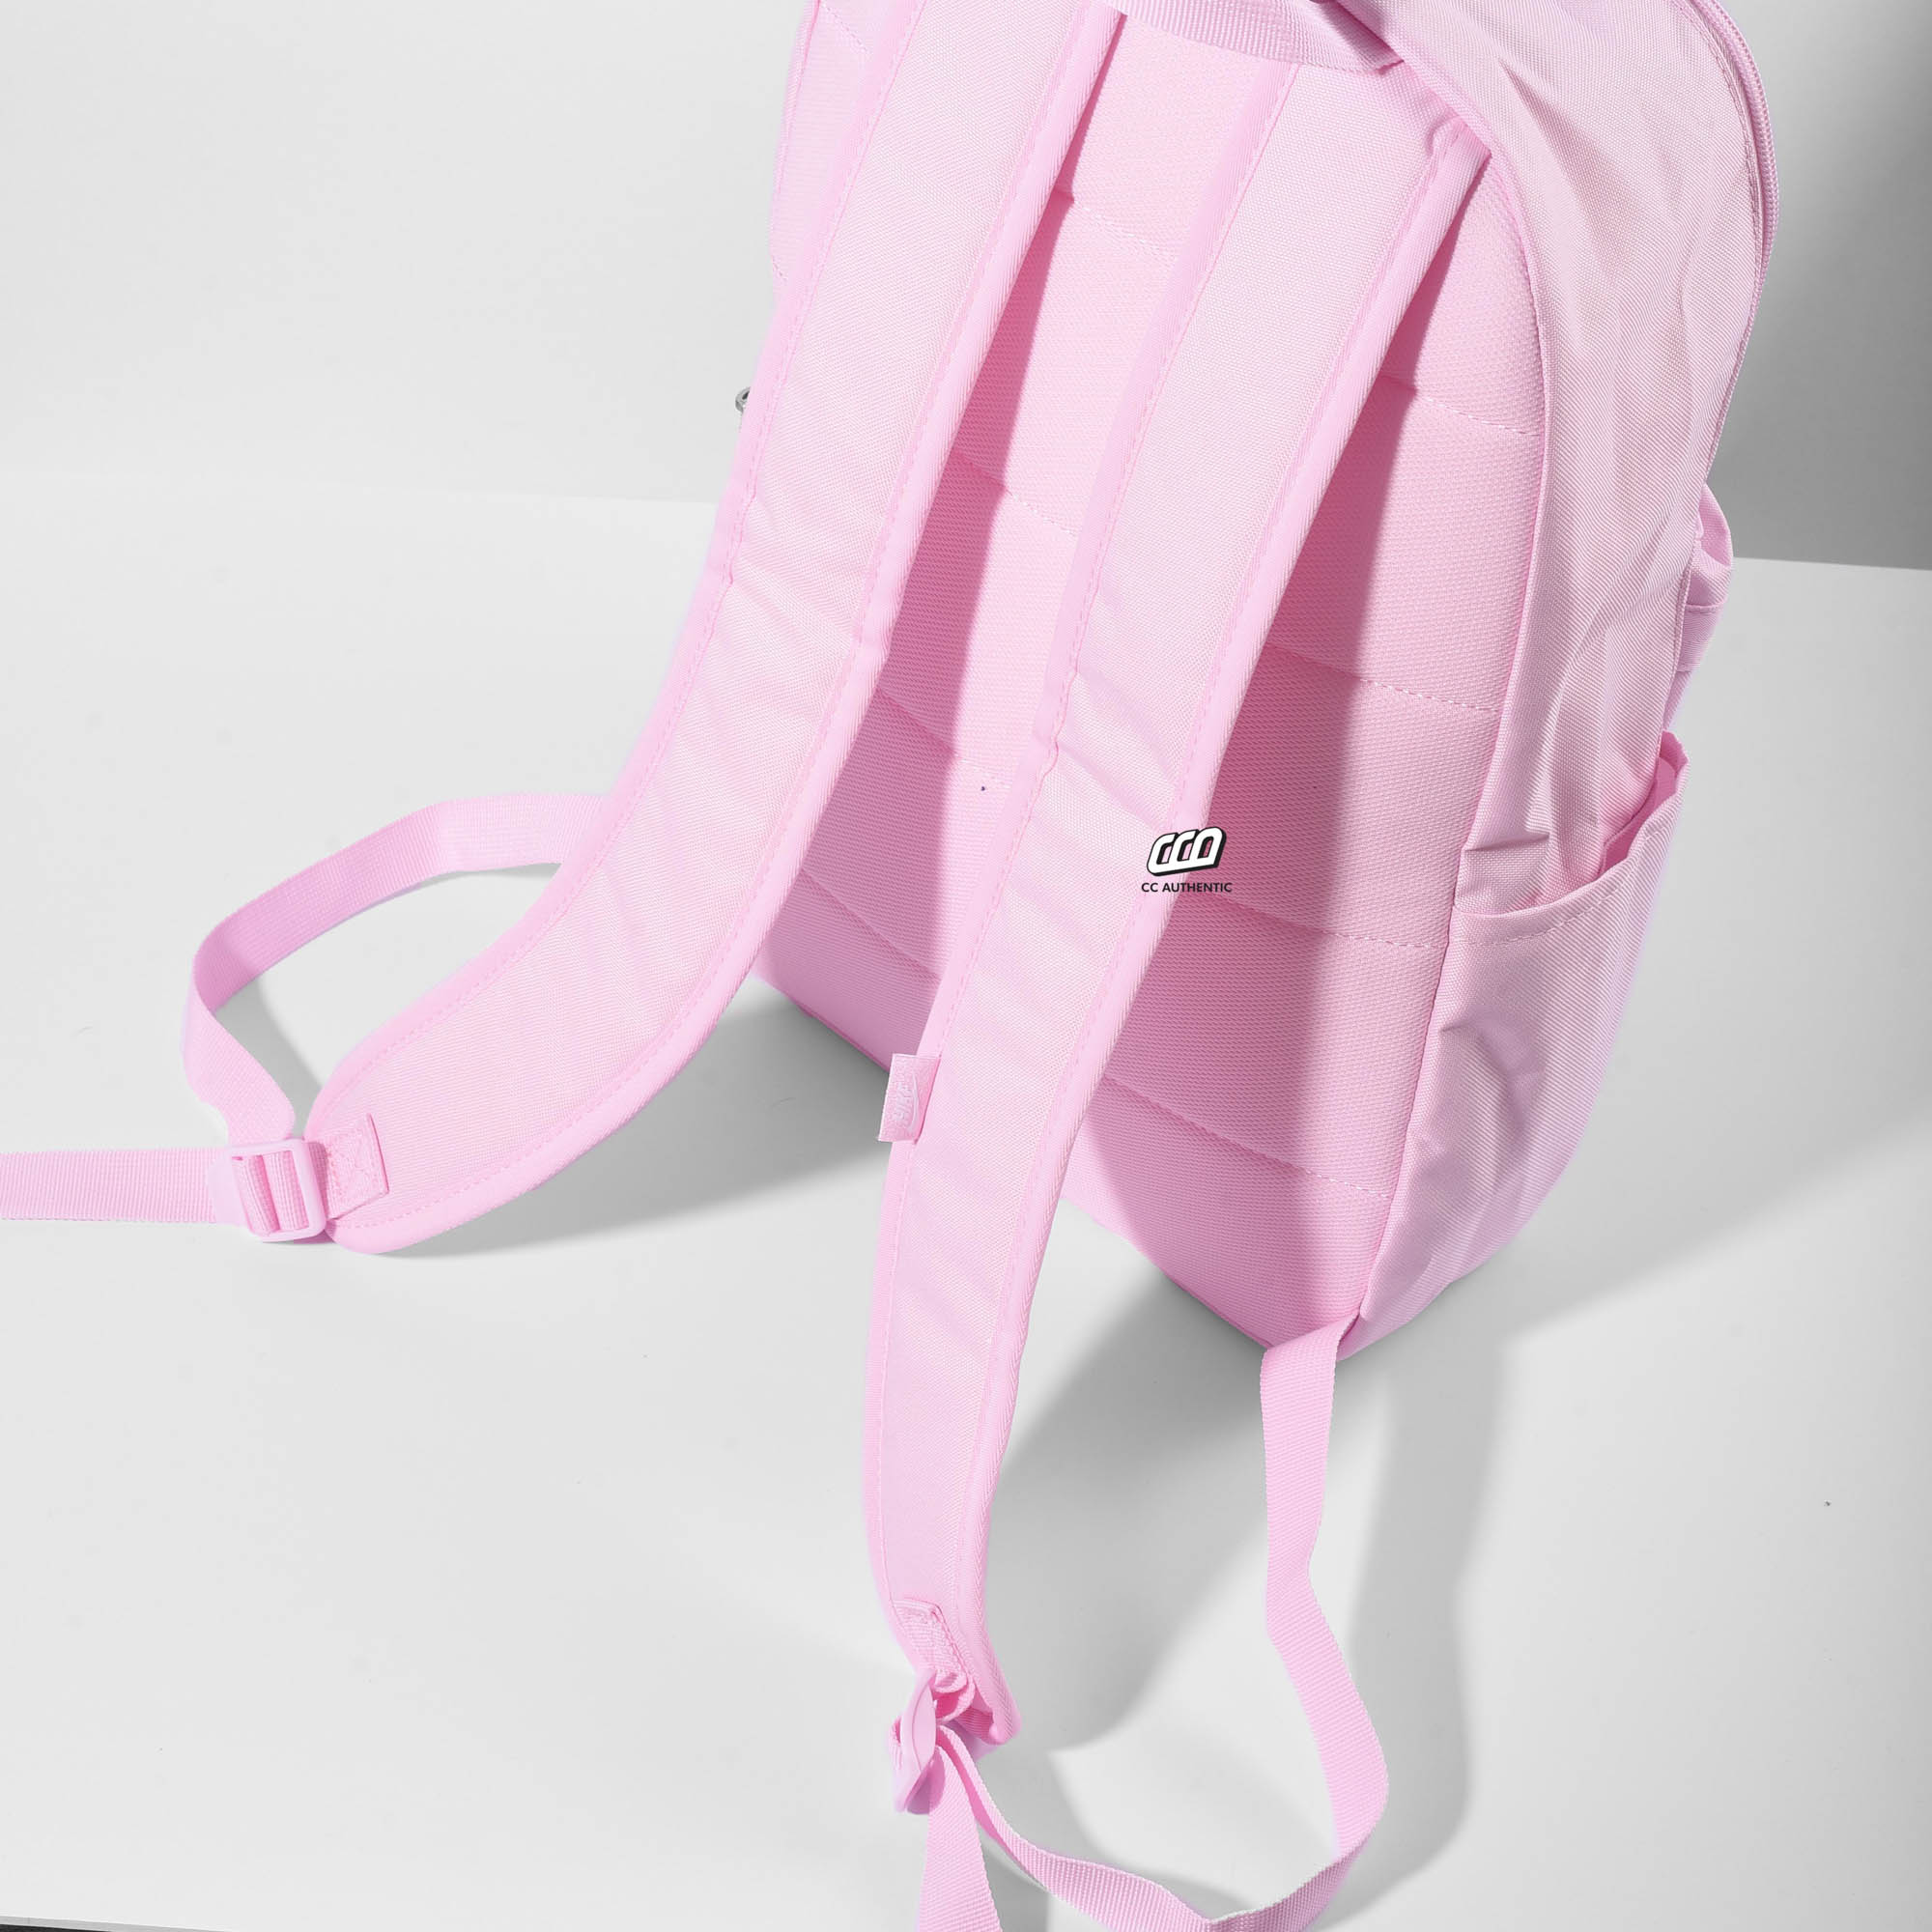 NIKE HERITAGE BACKPACK - CANDY PINK